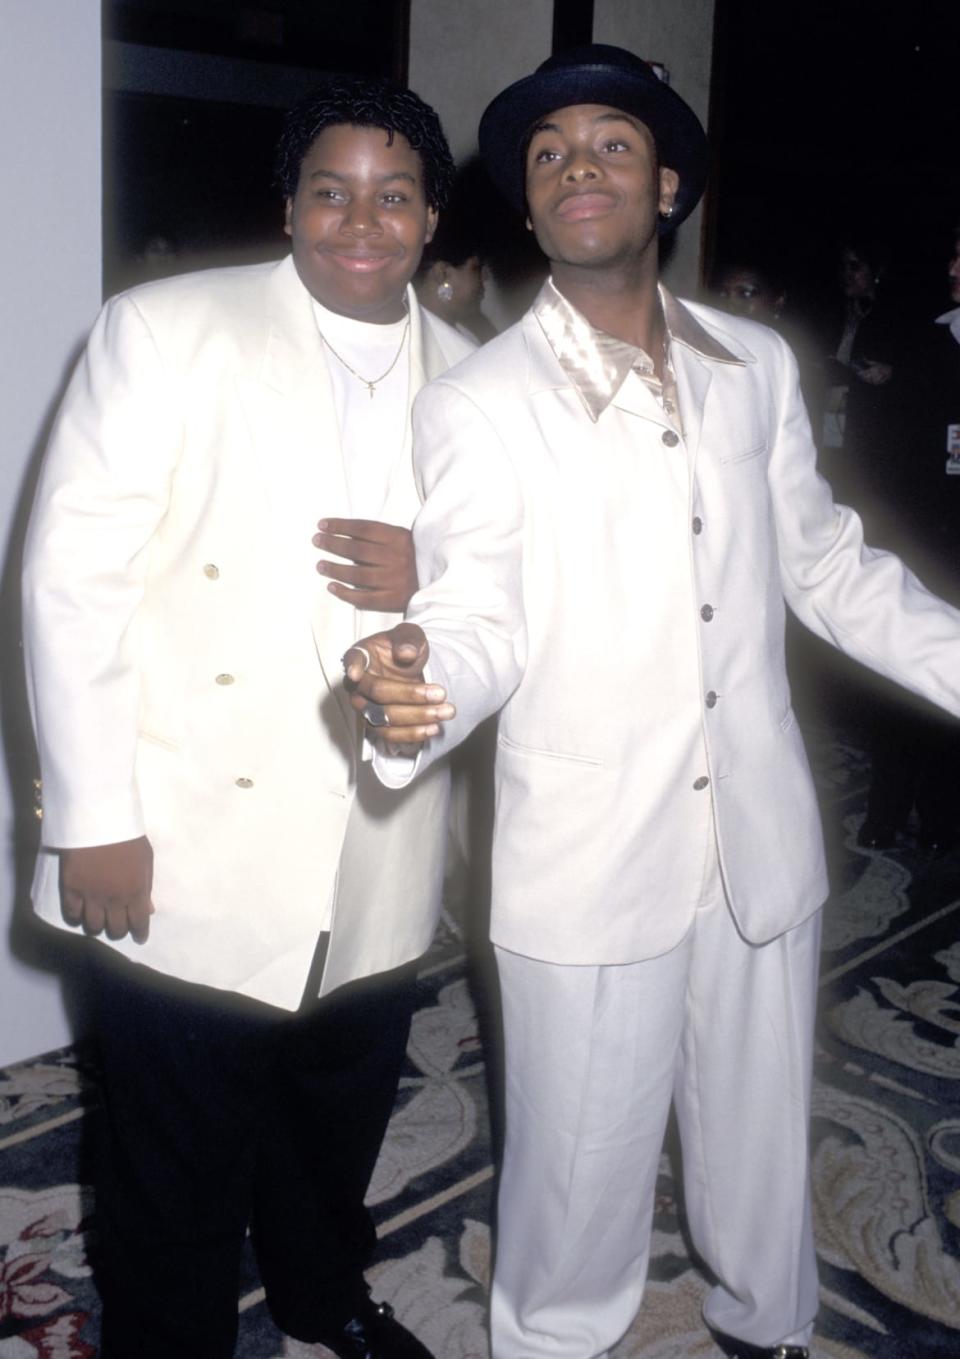 <div class="inline-image__caption"><p>Kenan Thompson and Kel Mitchell attend The Nancy Davis Foundation's Fifth Annual Race to Erase MS Gala on November 14, 1997, at Century Plaza Hotel in Los Angeles, California.</p></div> <div class="inline-image__credit">Getty</div>